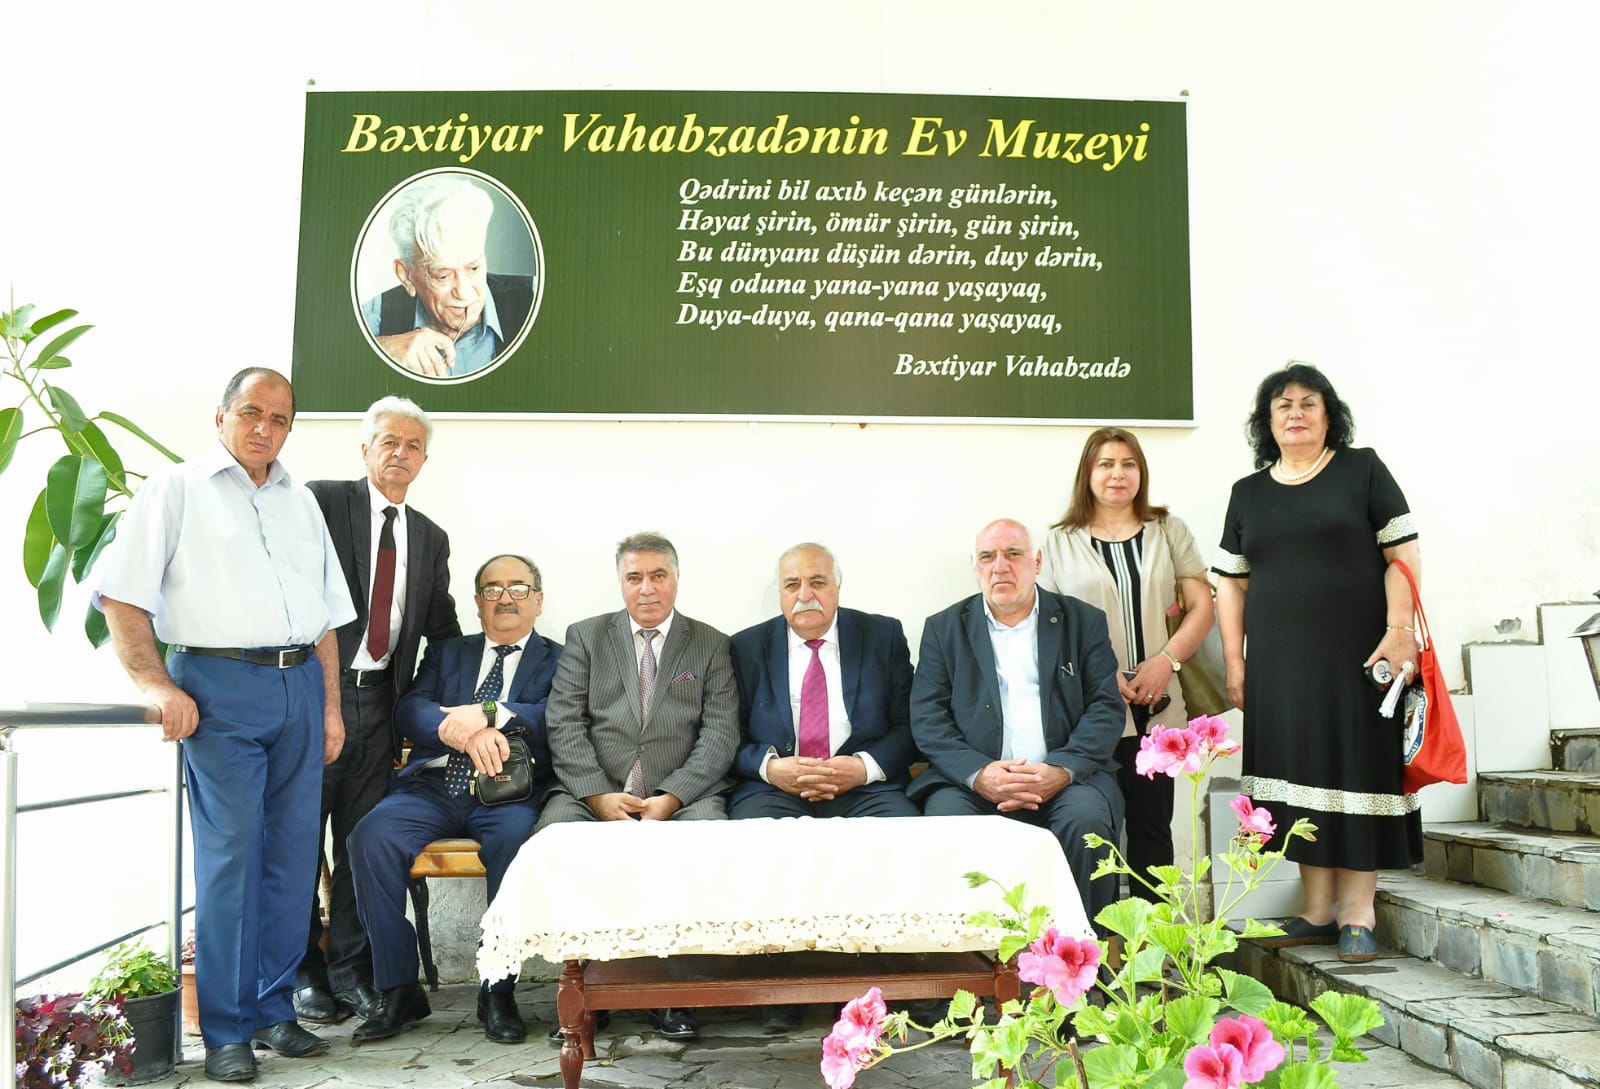 International Scientific Conference "IV International Bakhtiyar Vahabzadeh Turkic World History, Culture and Literature" dedicated to the creation of Bakhtiyar Vahabzadeh was held in Sheki